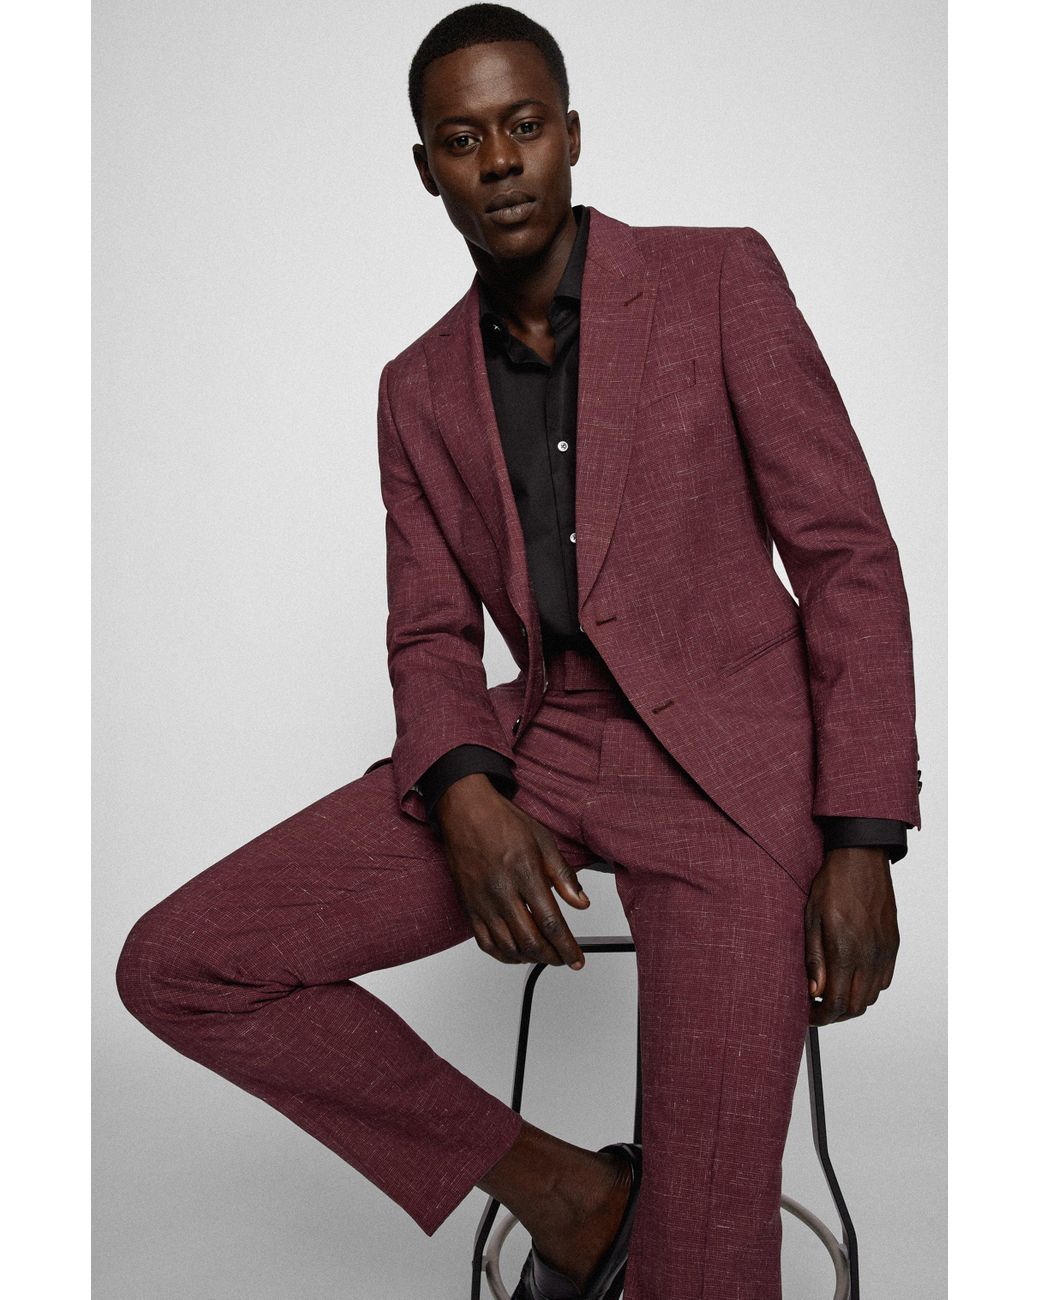 BOSS by HUGO BOSS Slim-fit Suit In Patterned Virgin Wool And Linen in Red  for Men | Lyst